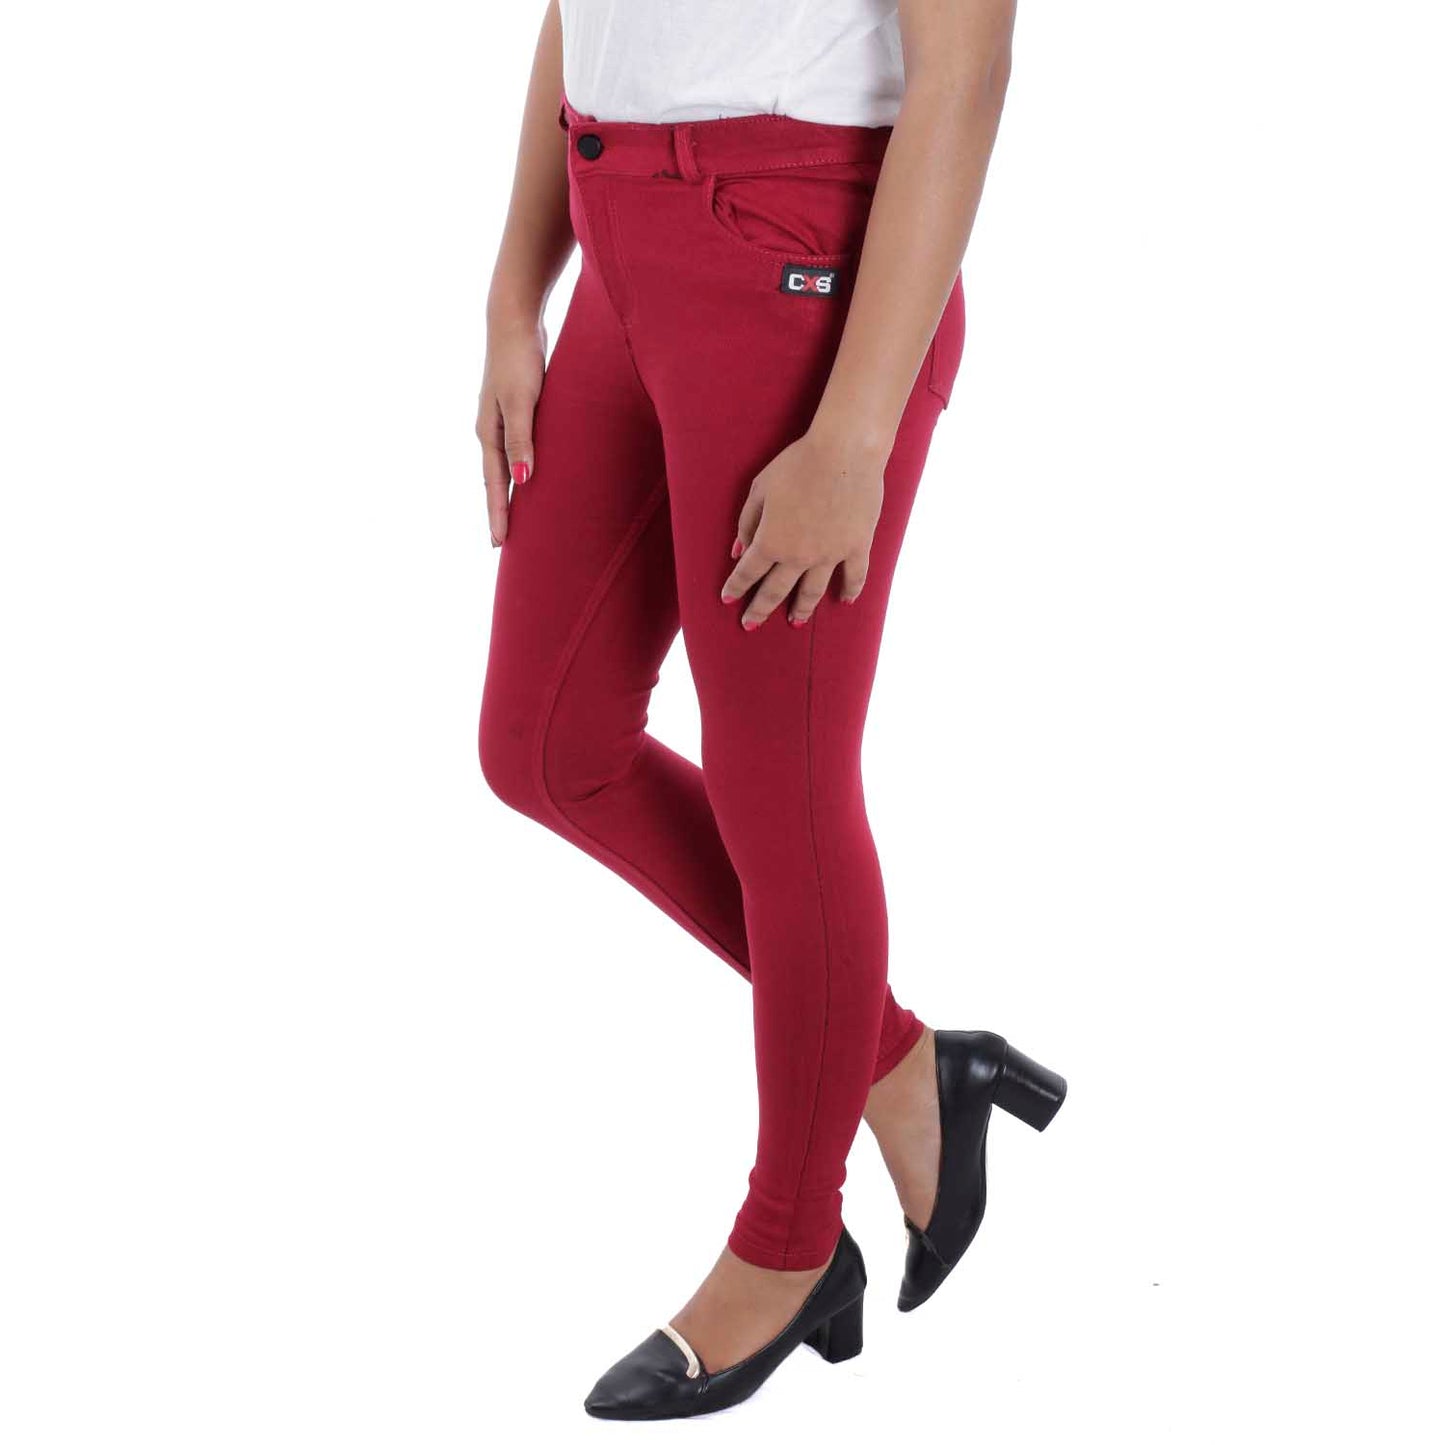 Maroon High Rise Skinny Stretchable Jeans